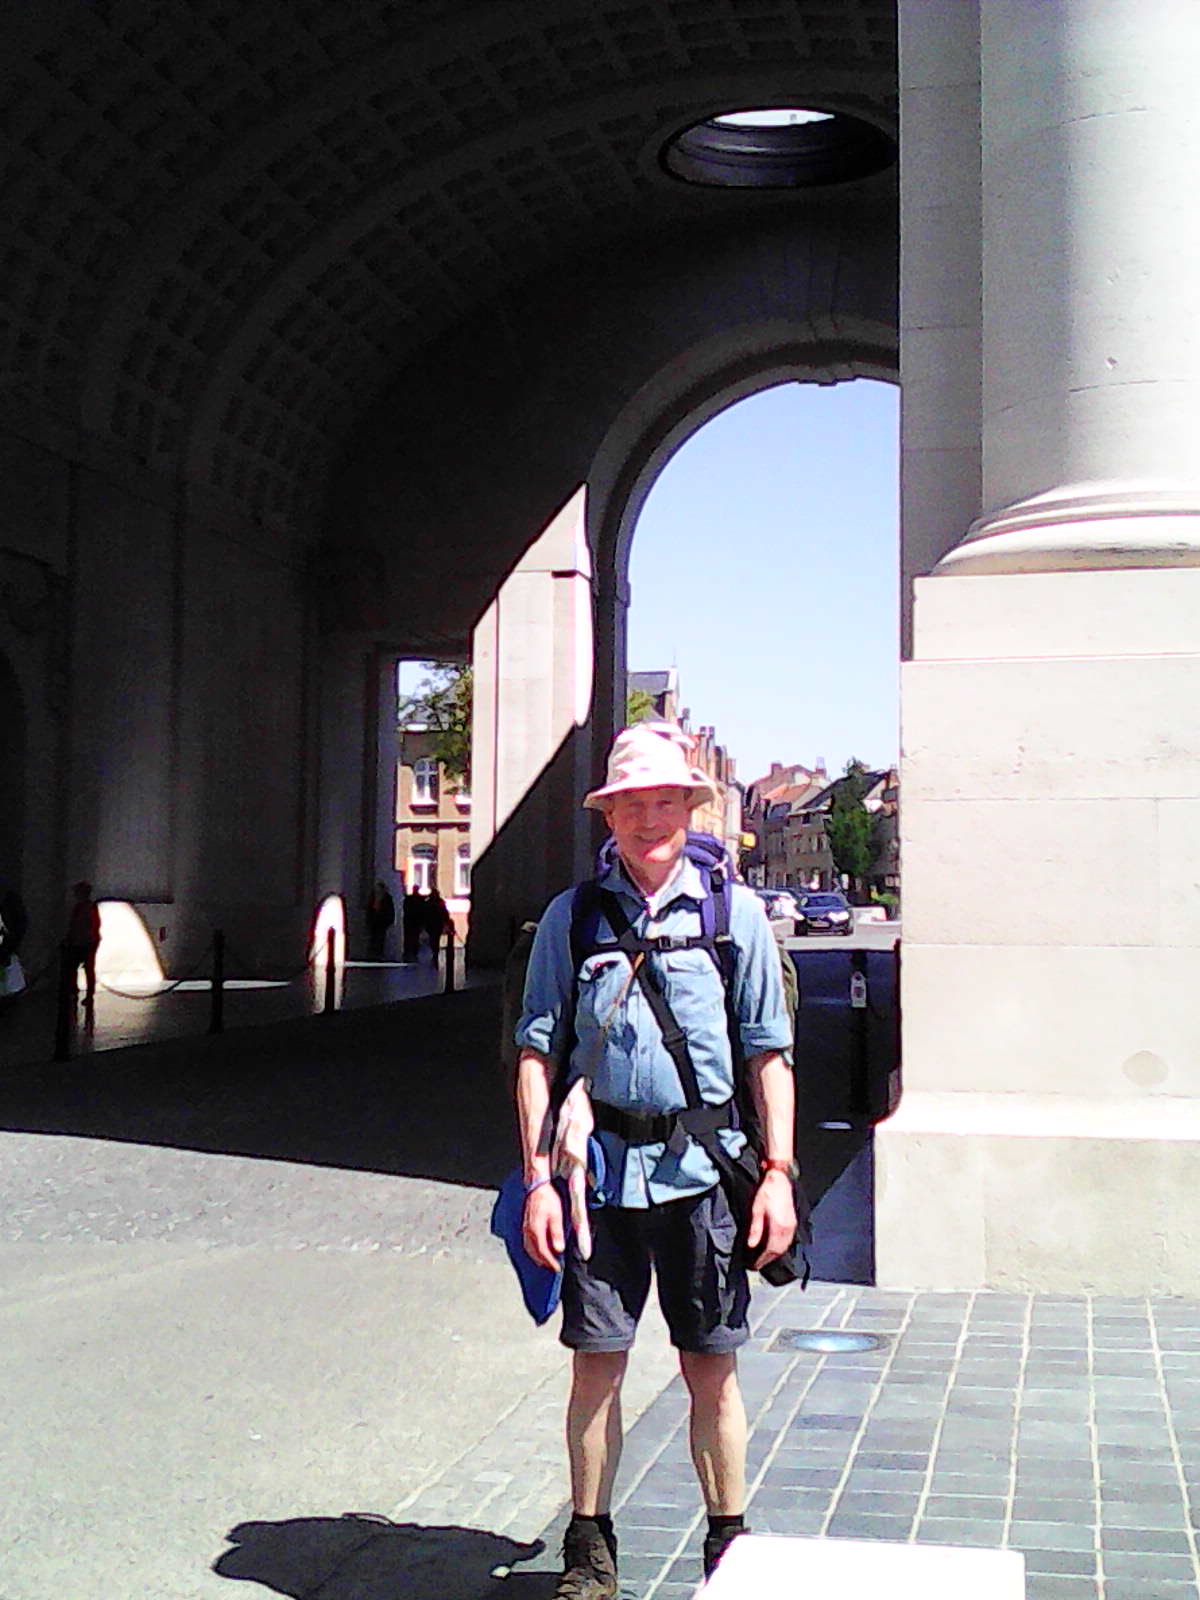 My Pilgrimage of Remebrance to the WW1 Battlefields of Ypres